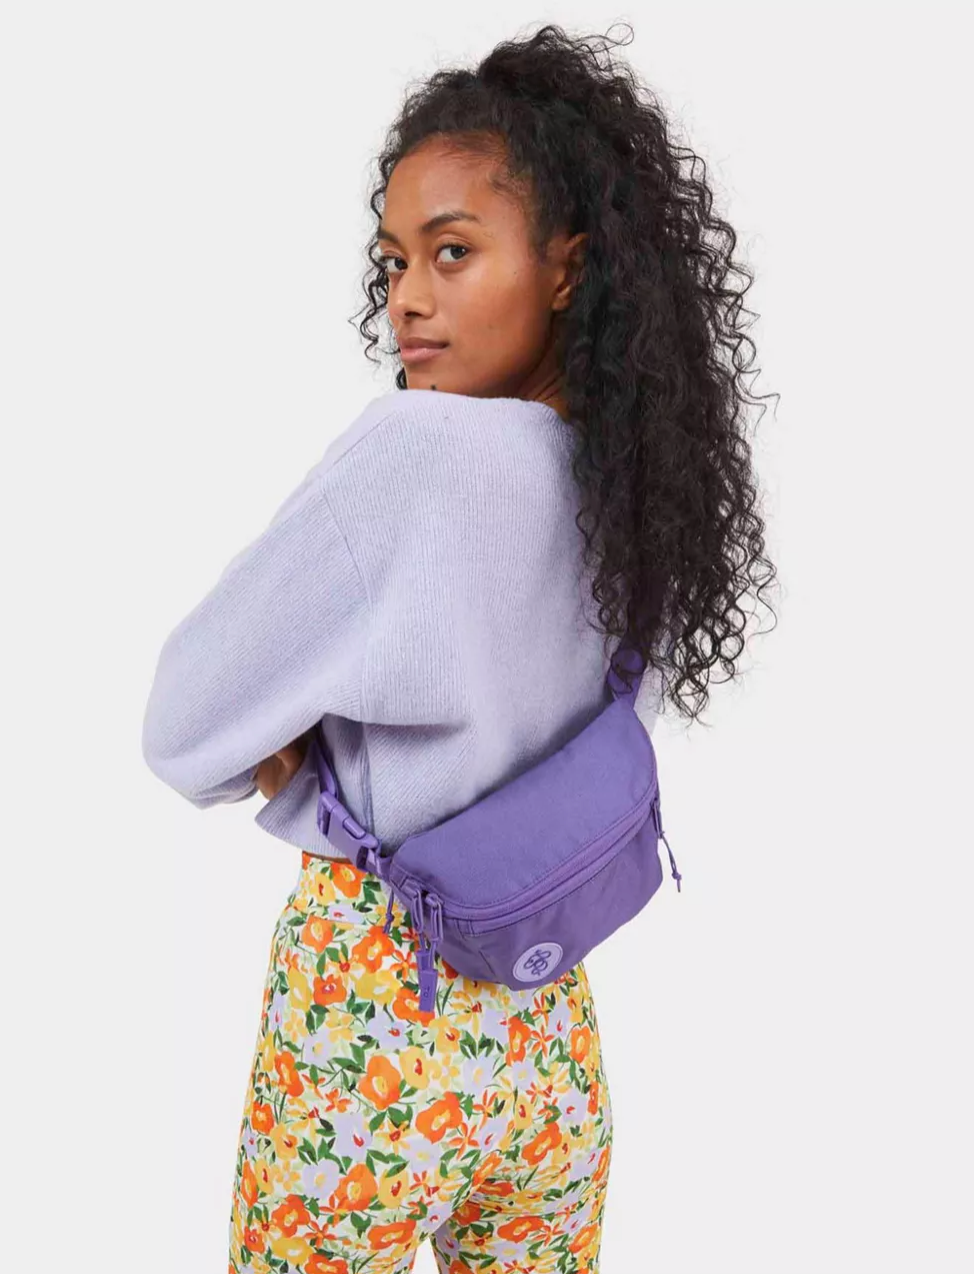 5 Stylish Fanny Packs You'll Actually Want To Travel With